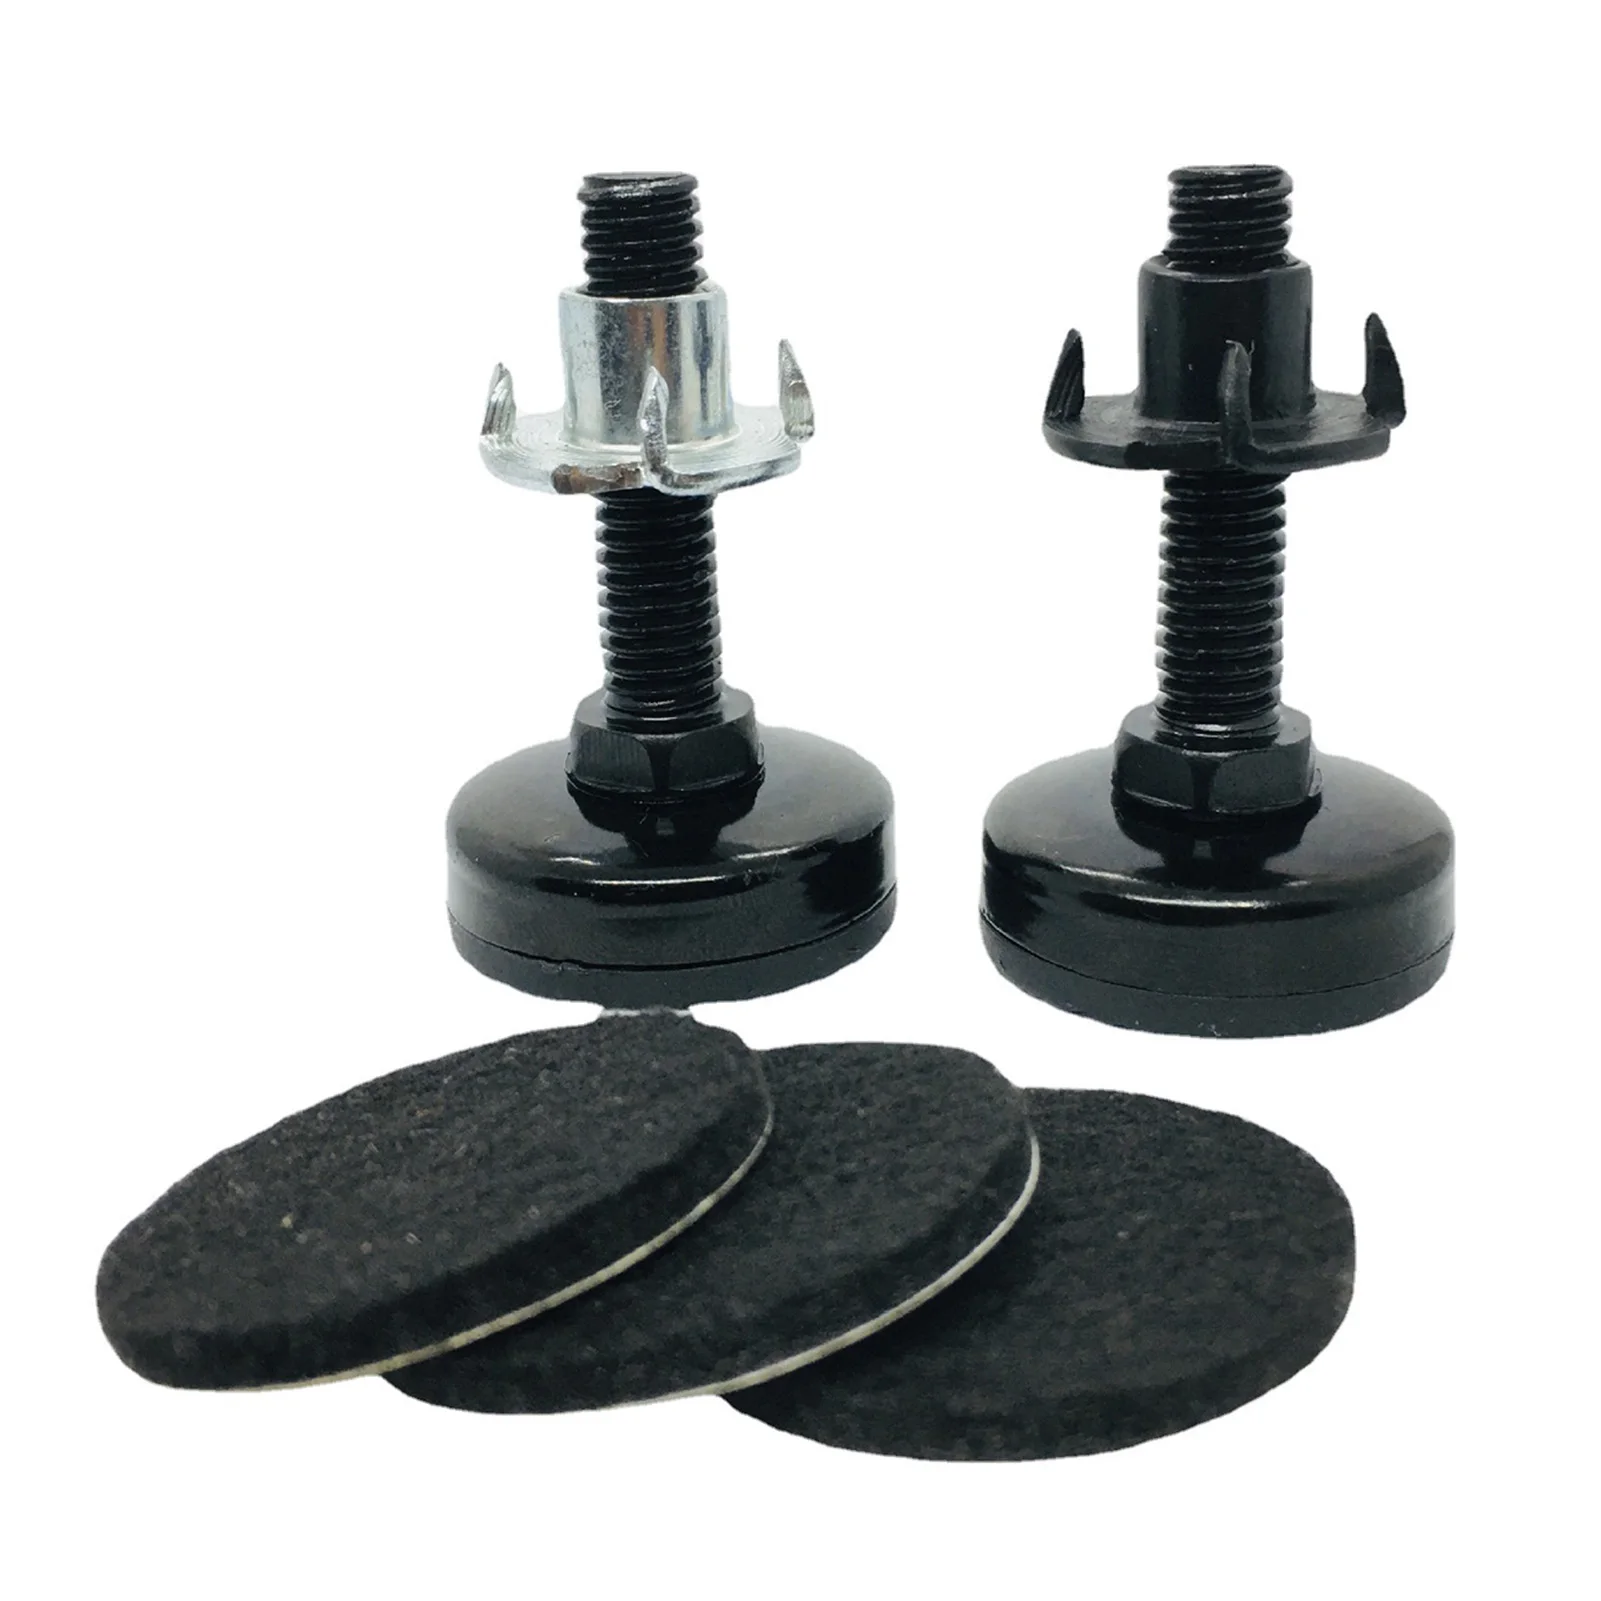 

Furniture Fixed Support Feet Adjustable Leveling Furniture Feet for Ceramic Tile Wood Floor Protection